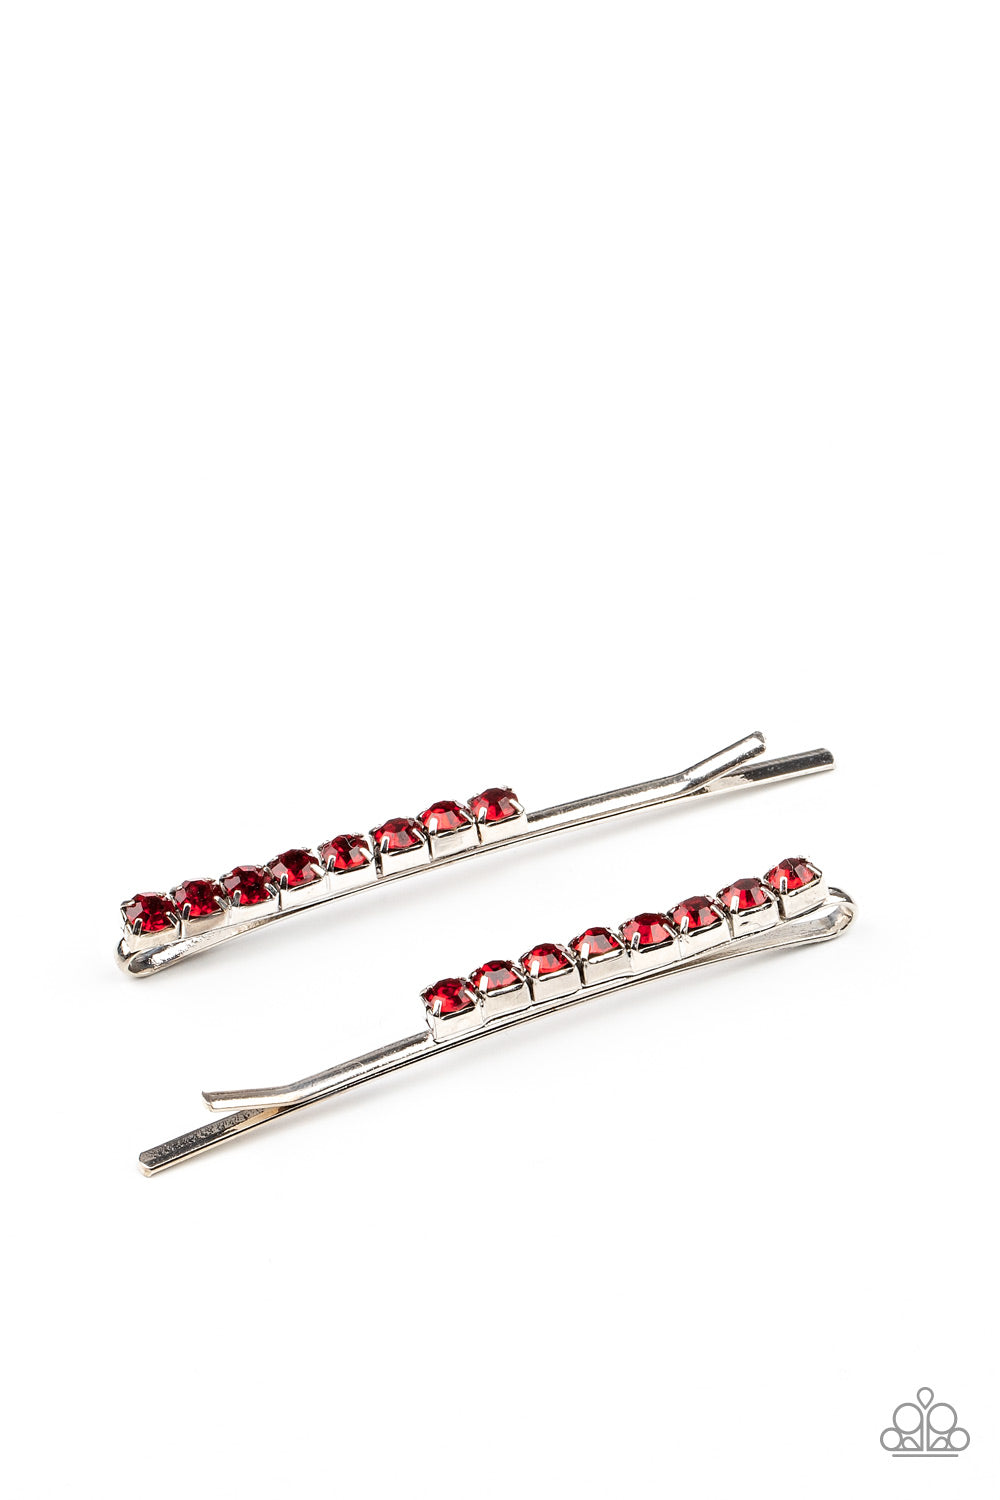 Satisfactory Sparkle Red Hair Clip